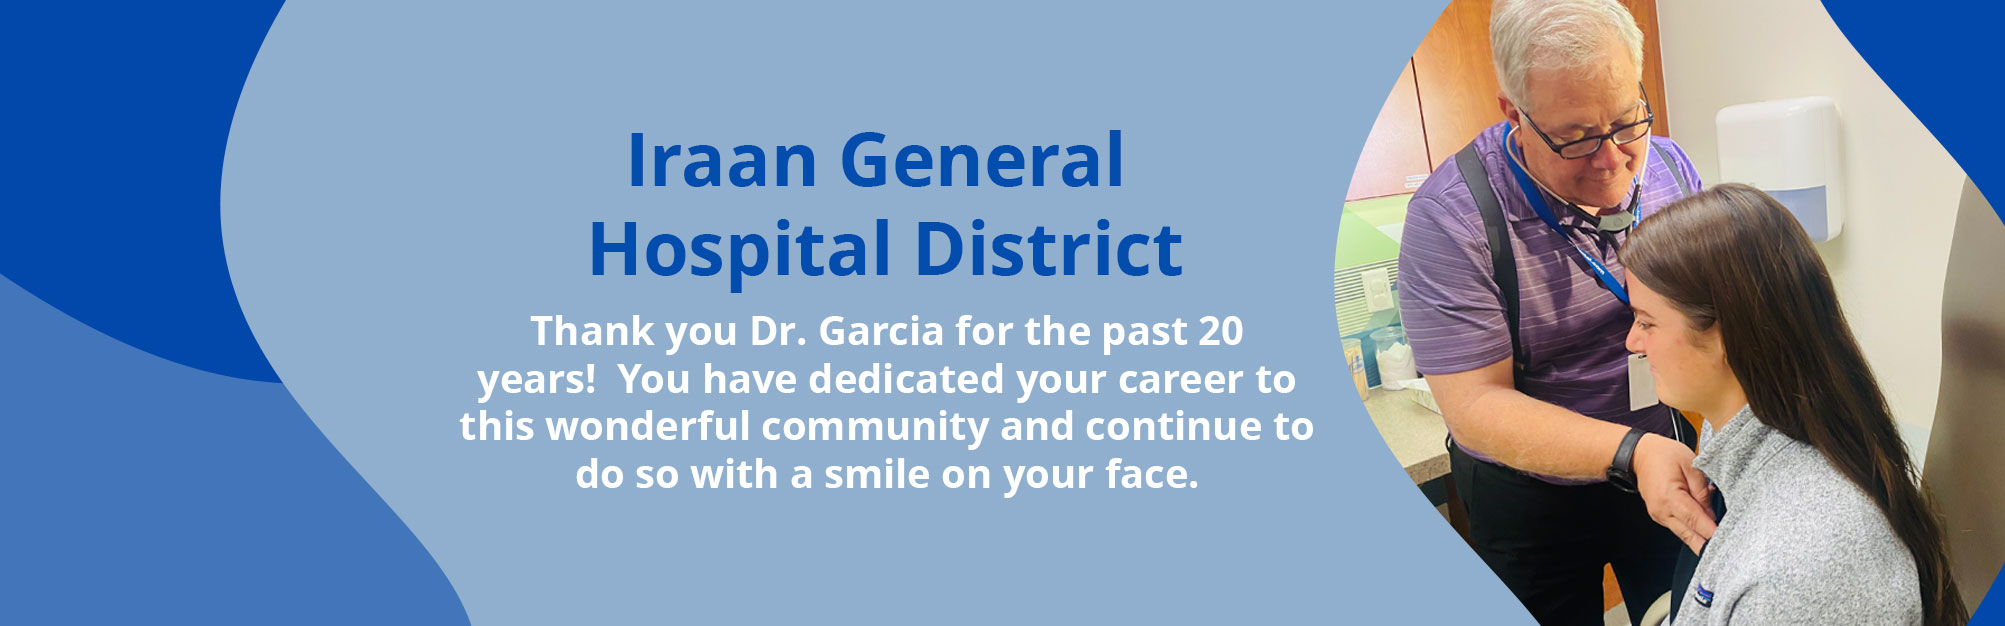 Thank you Dr. Garcia for the past 20 years!  You have dedicated your career to this wonderful community and continue to do so with a smile on your face.